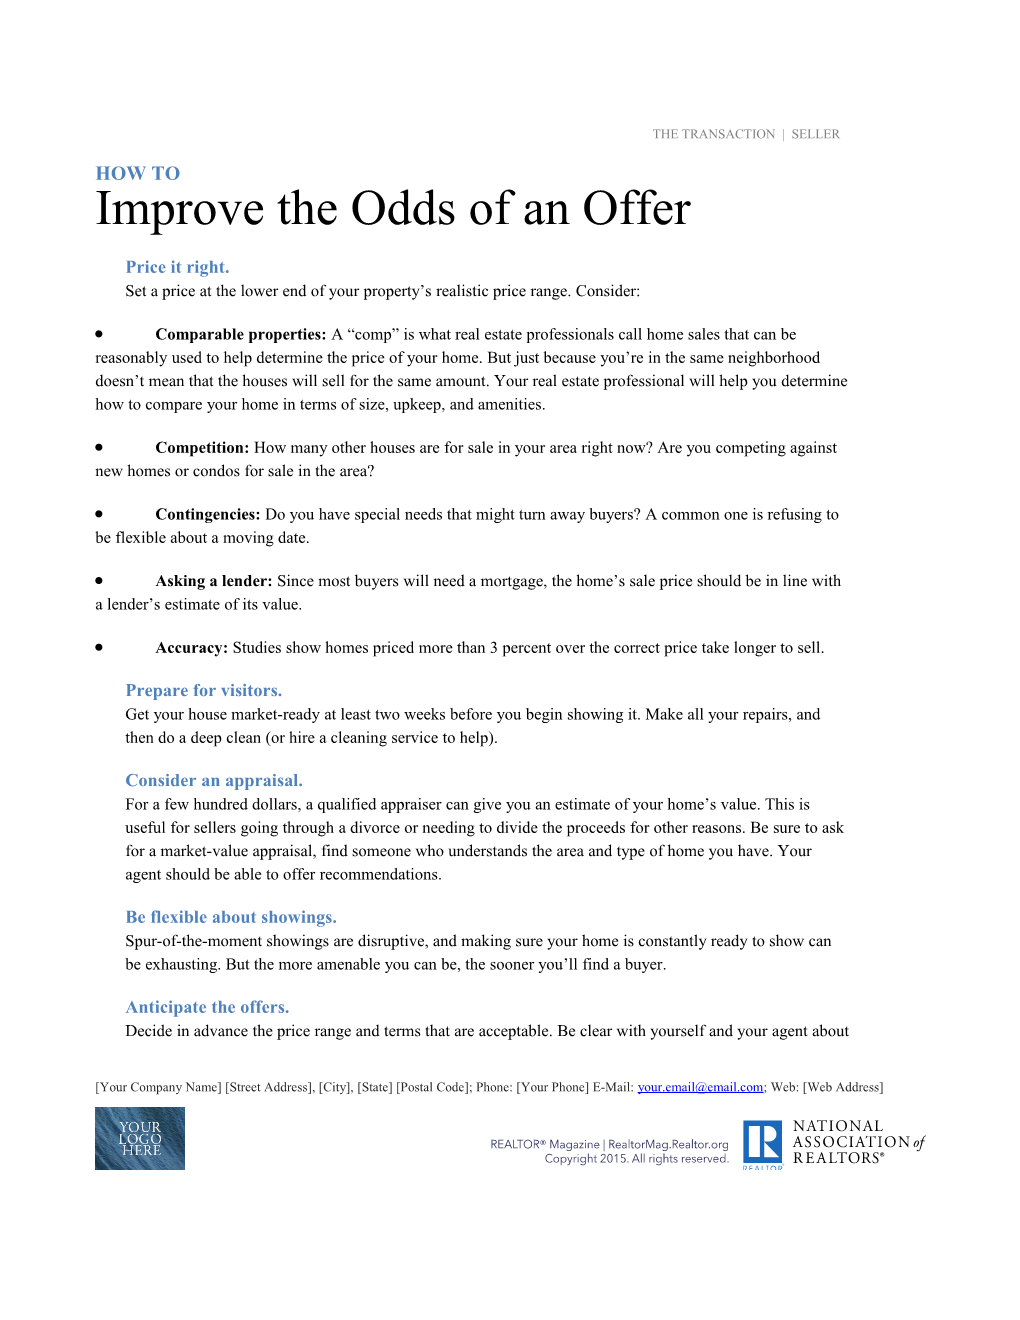 Improve the Odds of an Offer